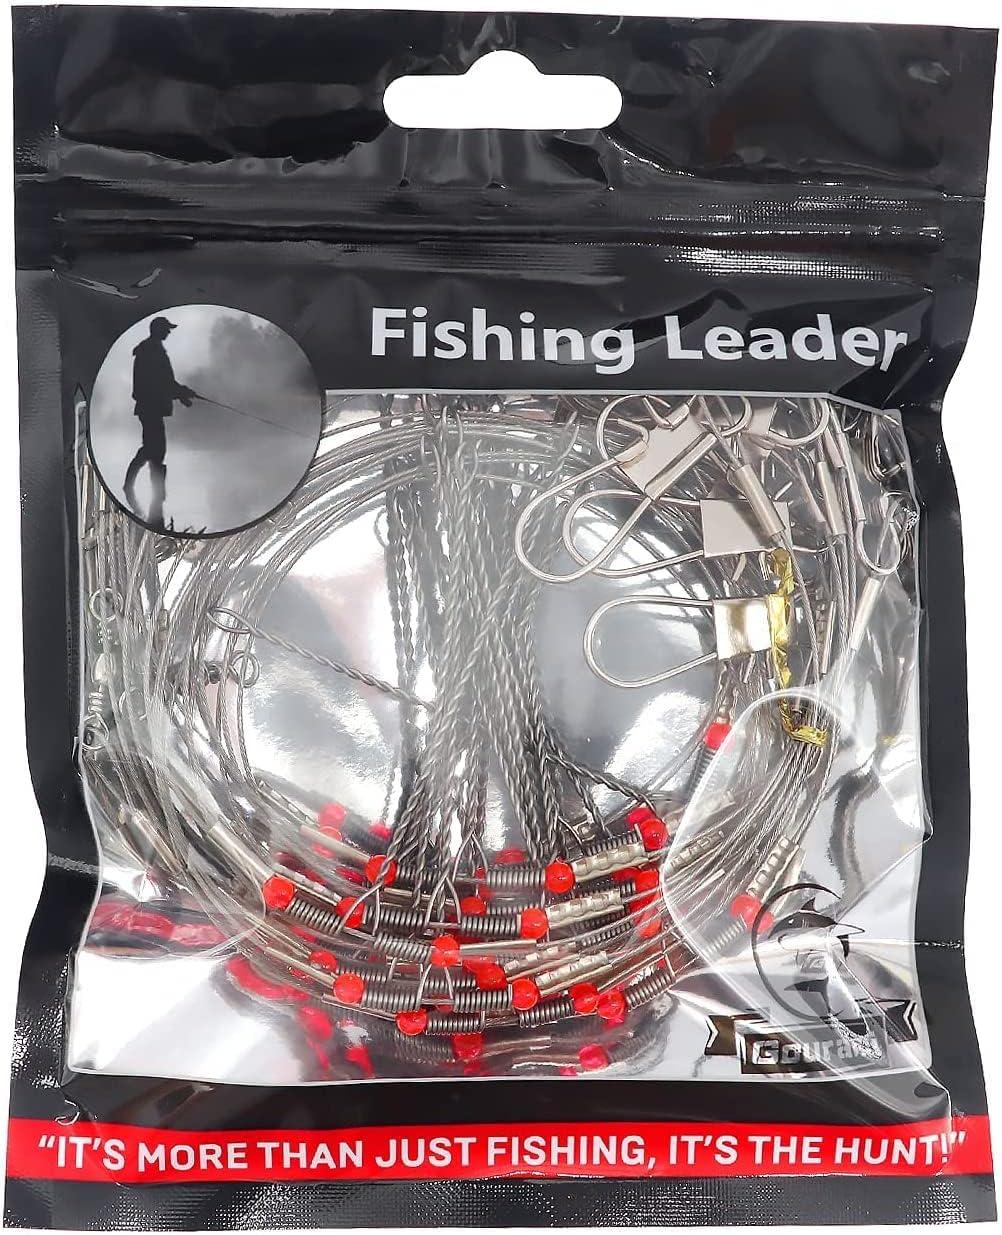 YOTO Fishing Tackle Leaders,Hi-Low Rig,Double Arms Saltwater Stainless  Steel Leader with Swivels,High-Strength Fish Wire Gear Equipment, Fishing  Gift C1-17.7 70lb-12pcs